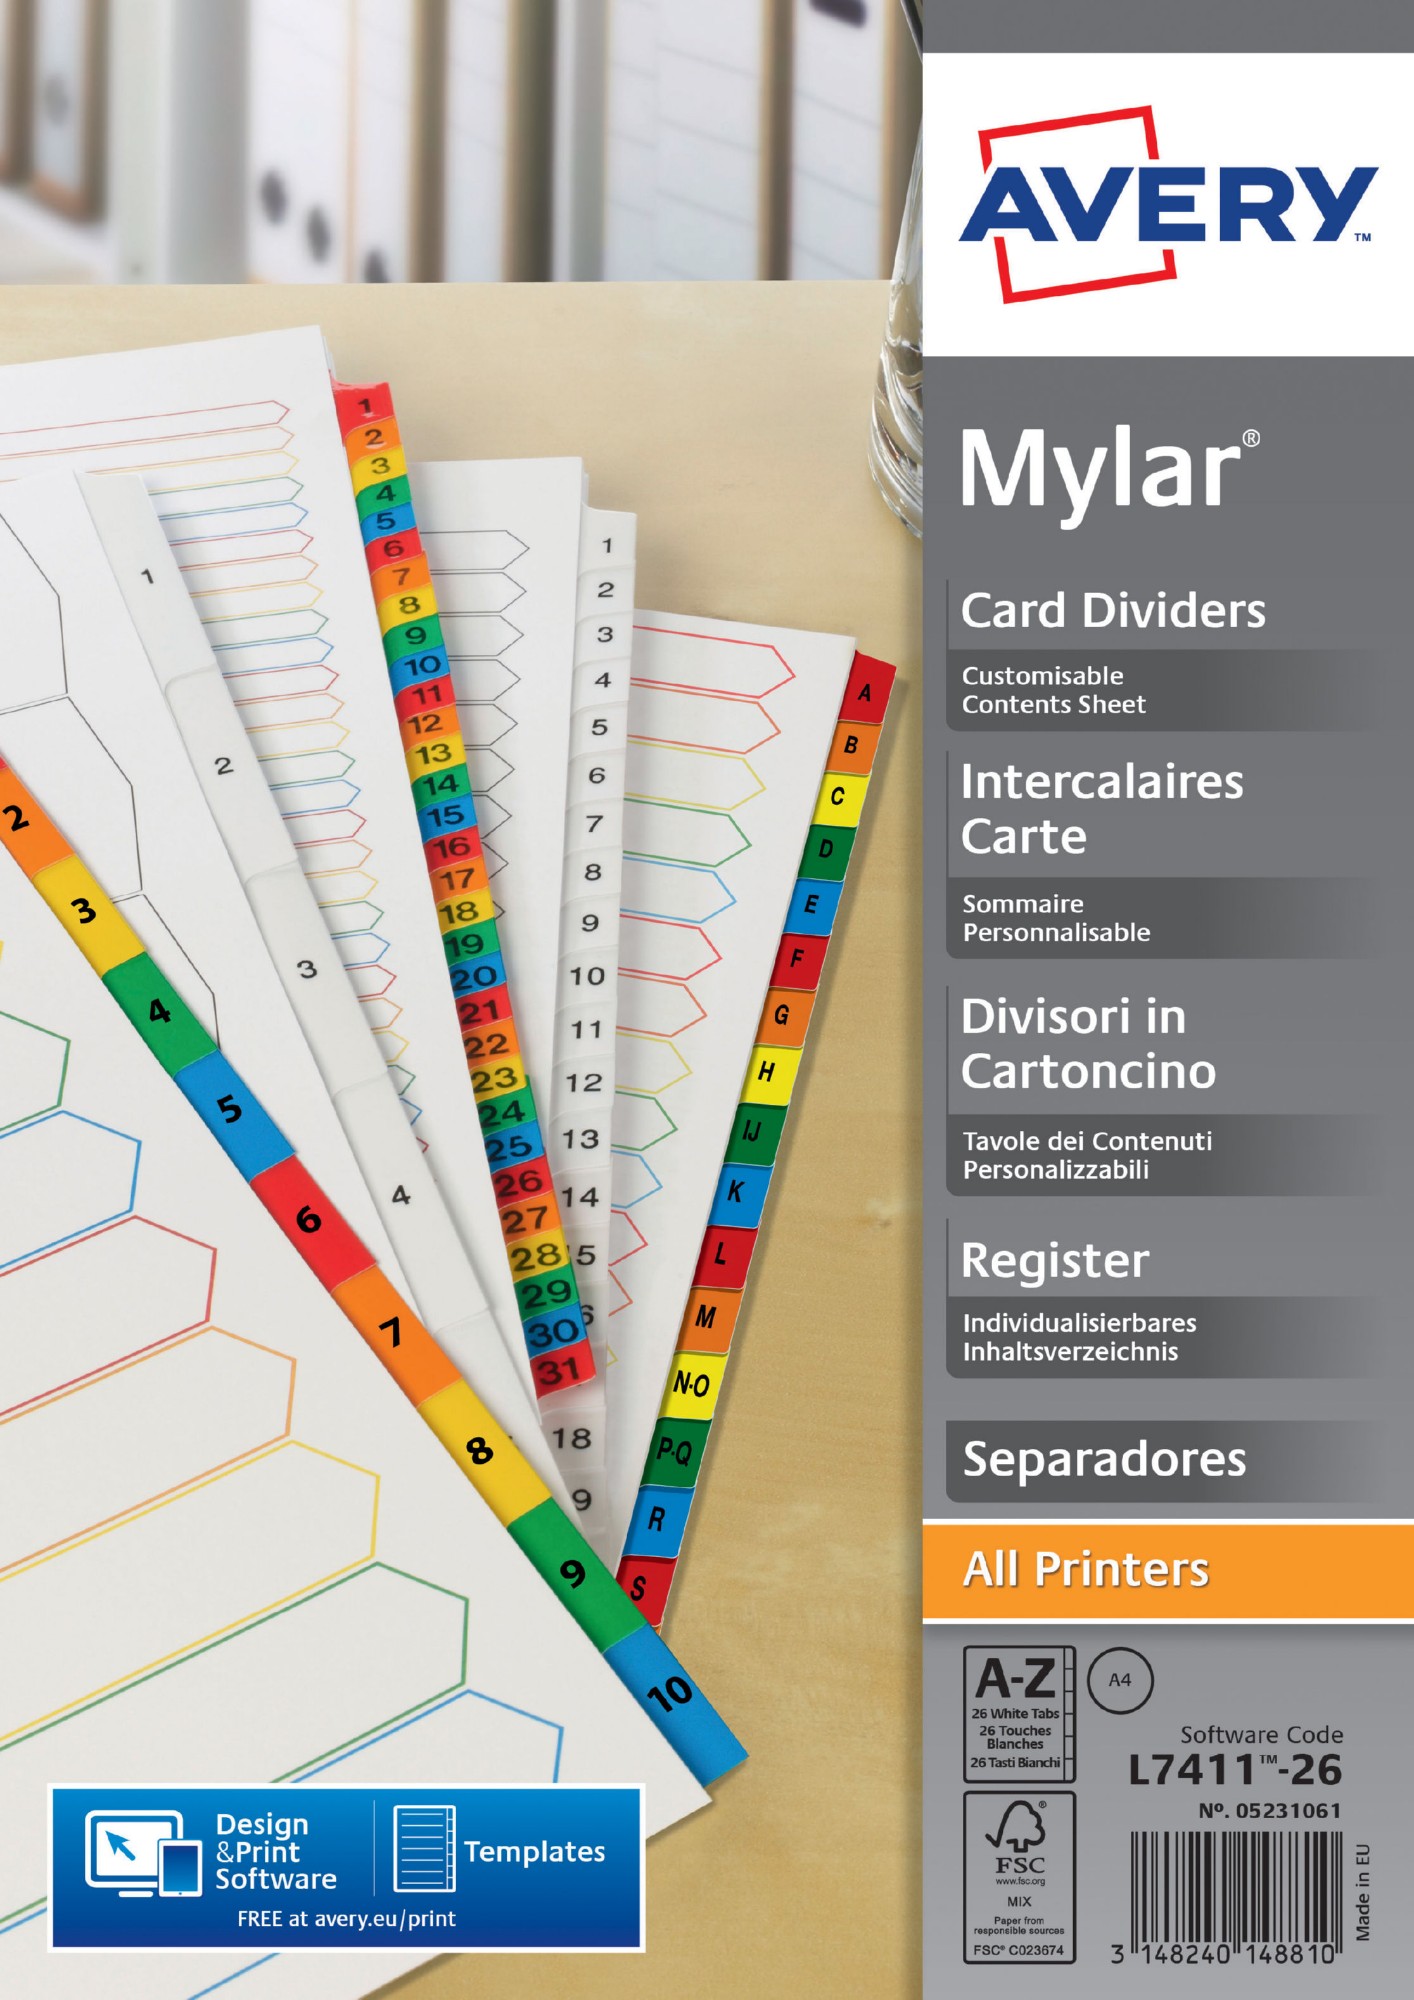 Avery Mylar Divider A-Z A4 Punched 150gsm White Card with White Mylar Tabs 05231061